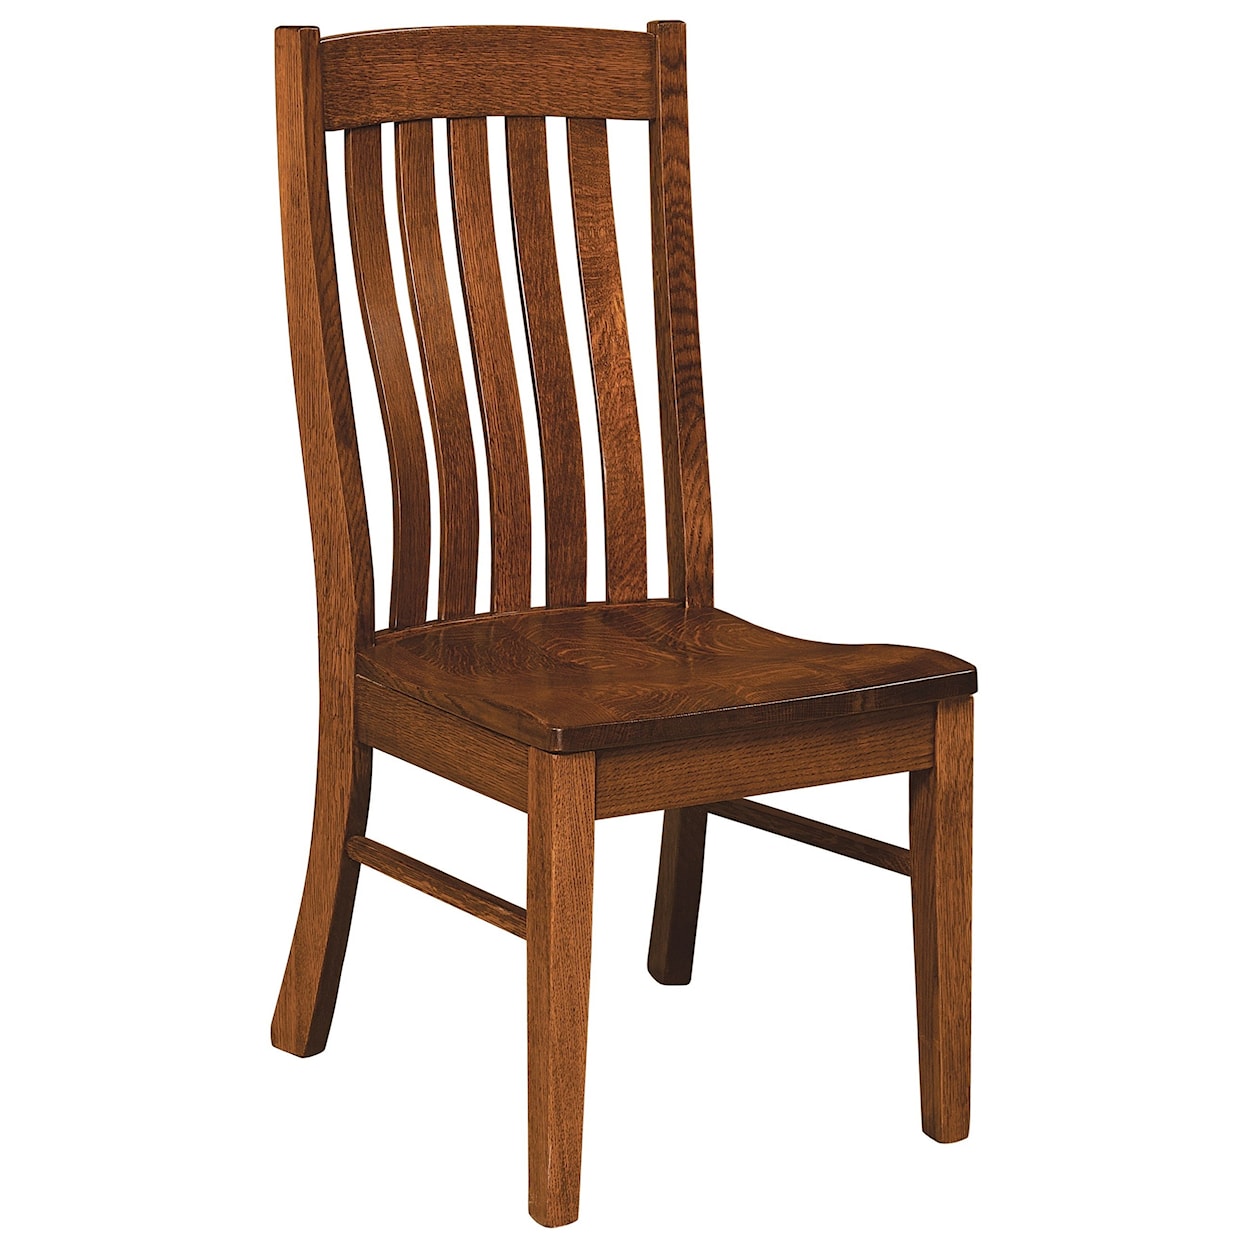 F&N Woodworking Houghton Side Chair - Leather Seat